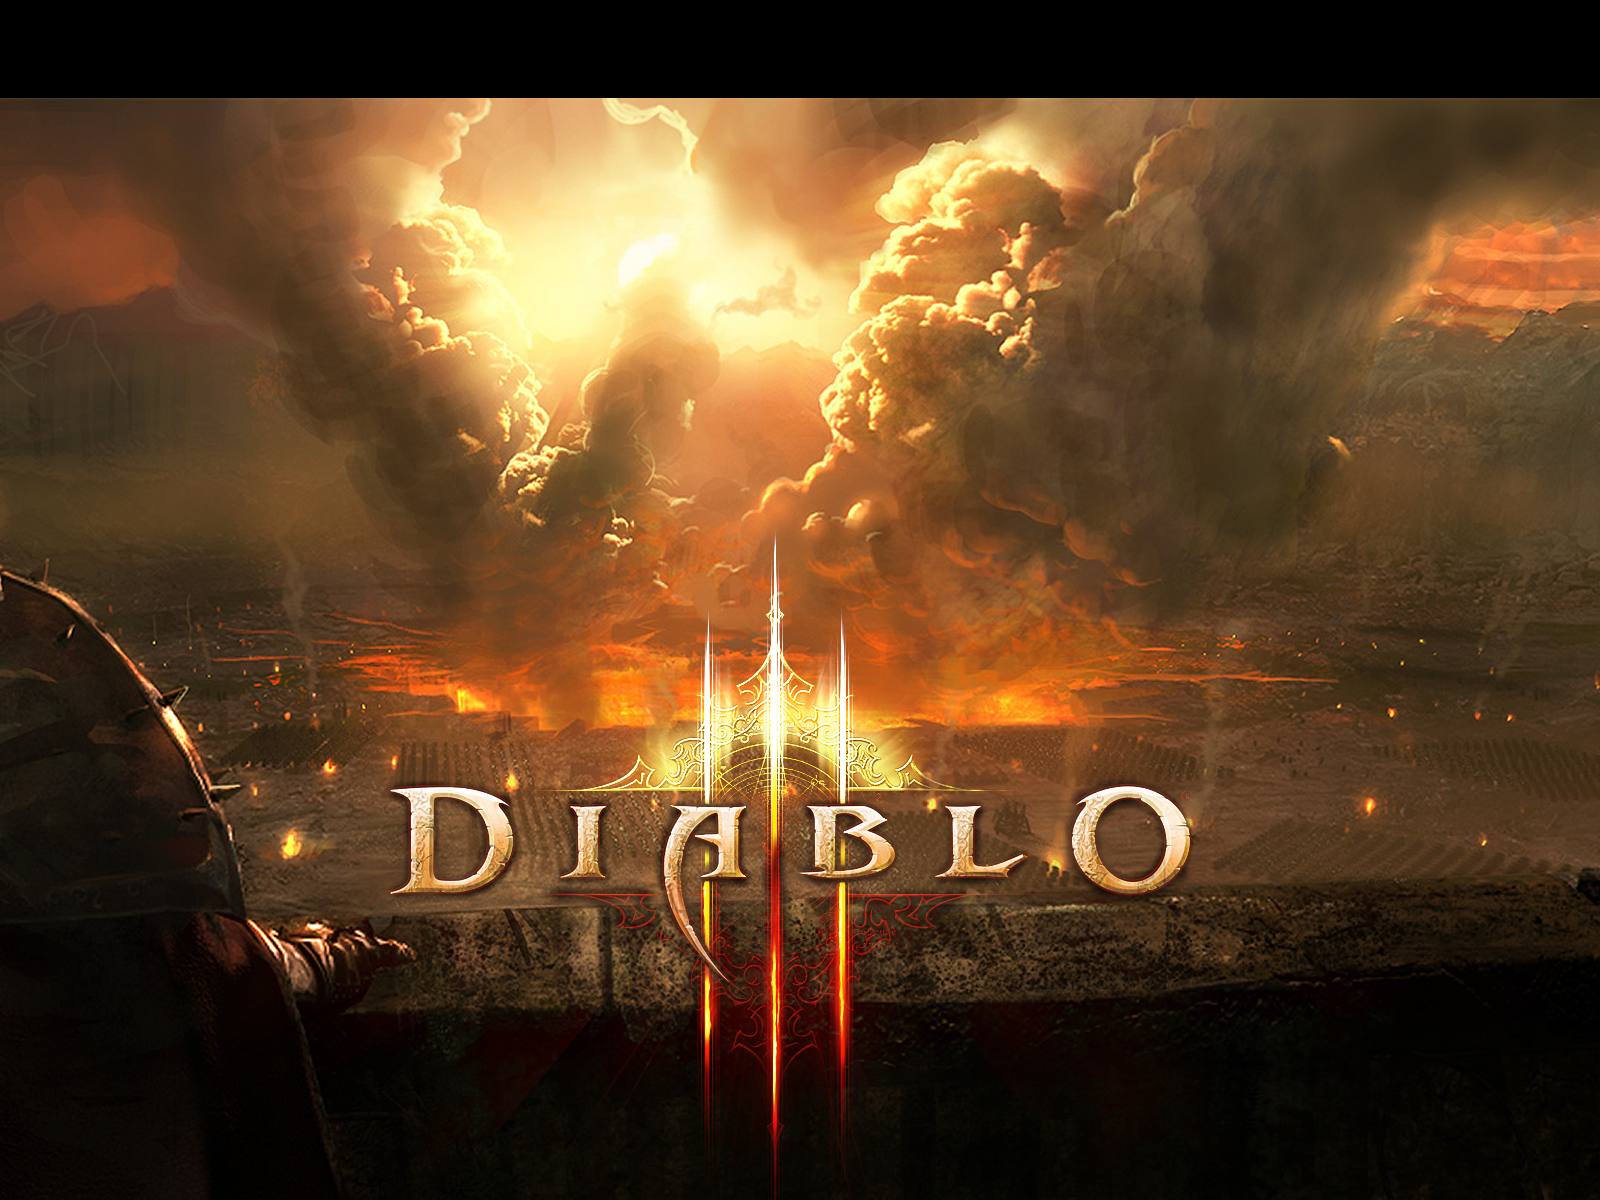 Collection Of Diablo Desktop Wallpaper And Image To